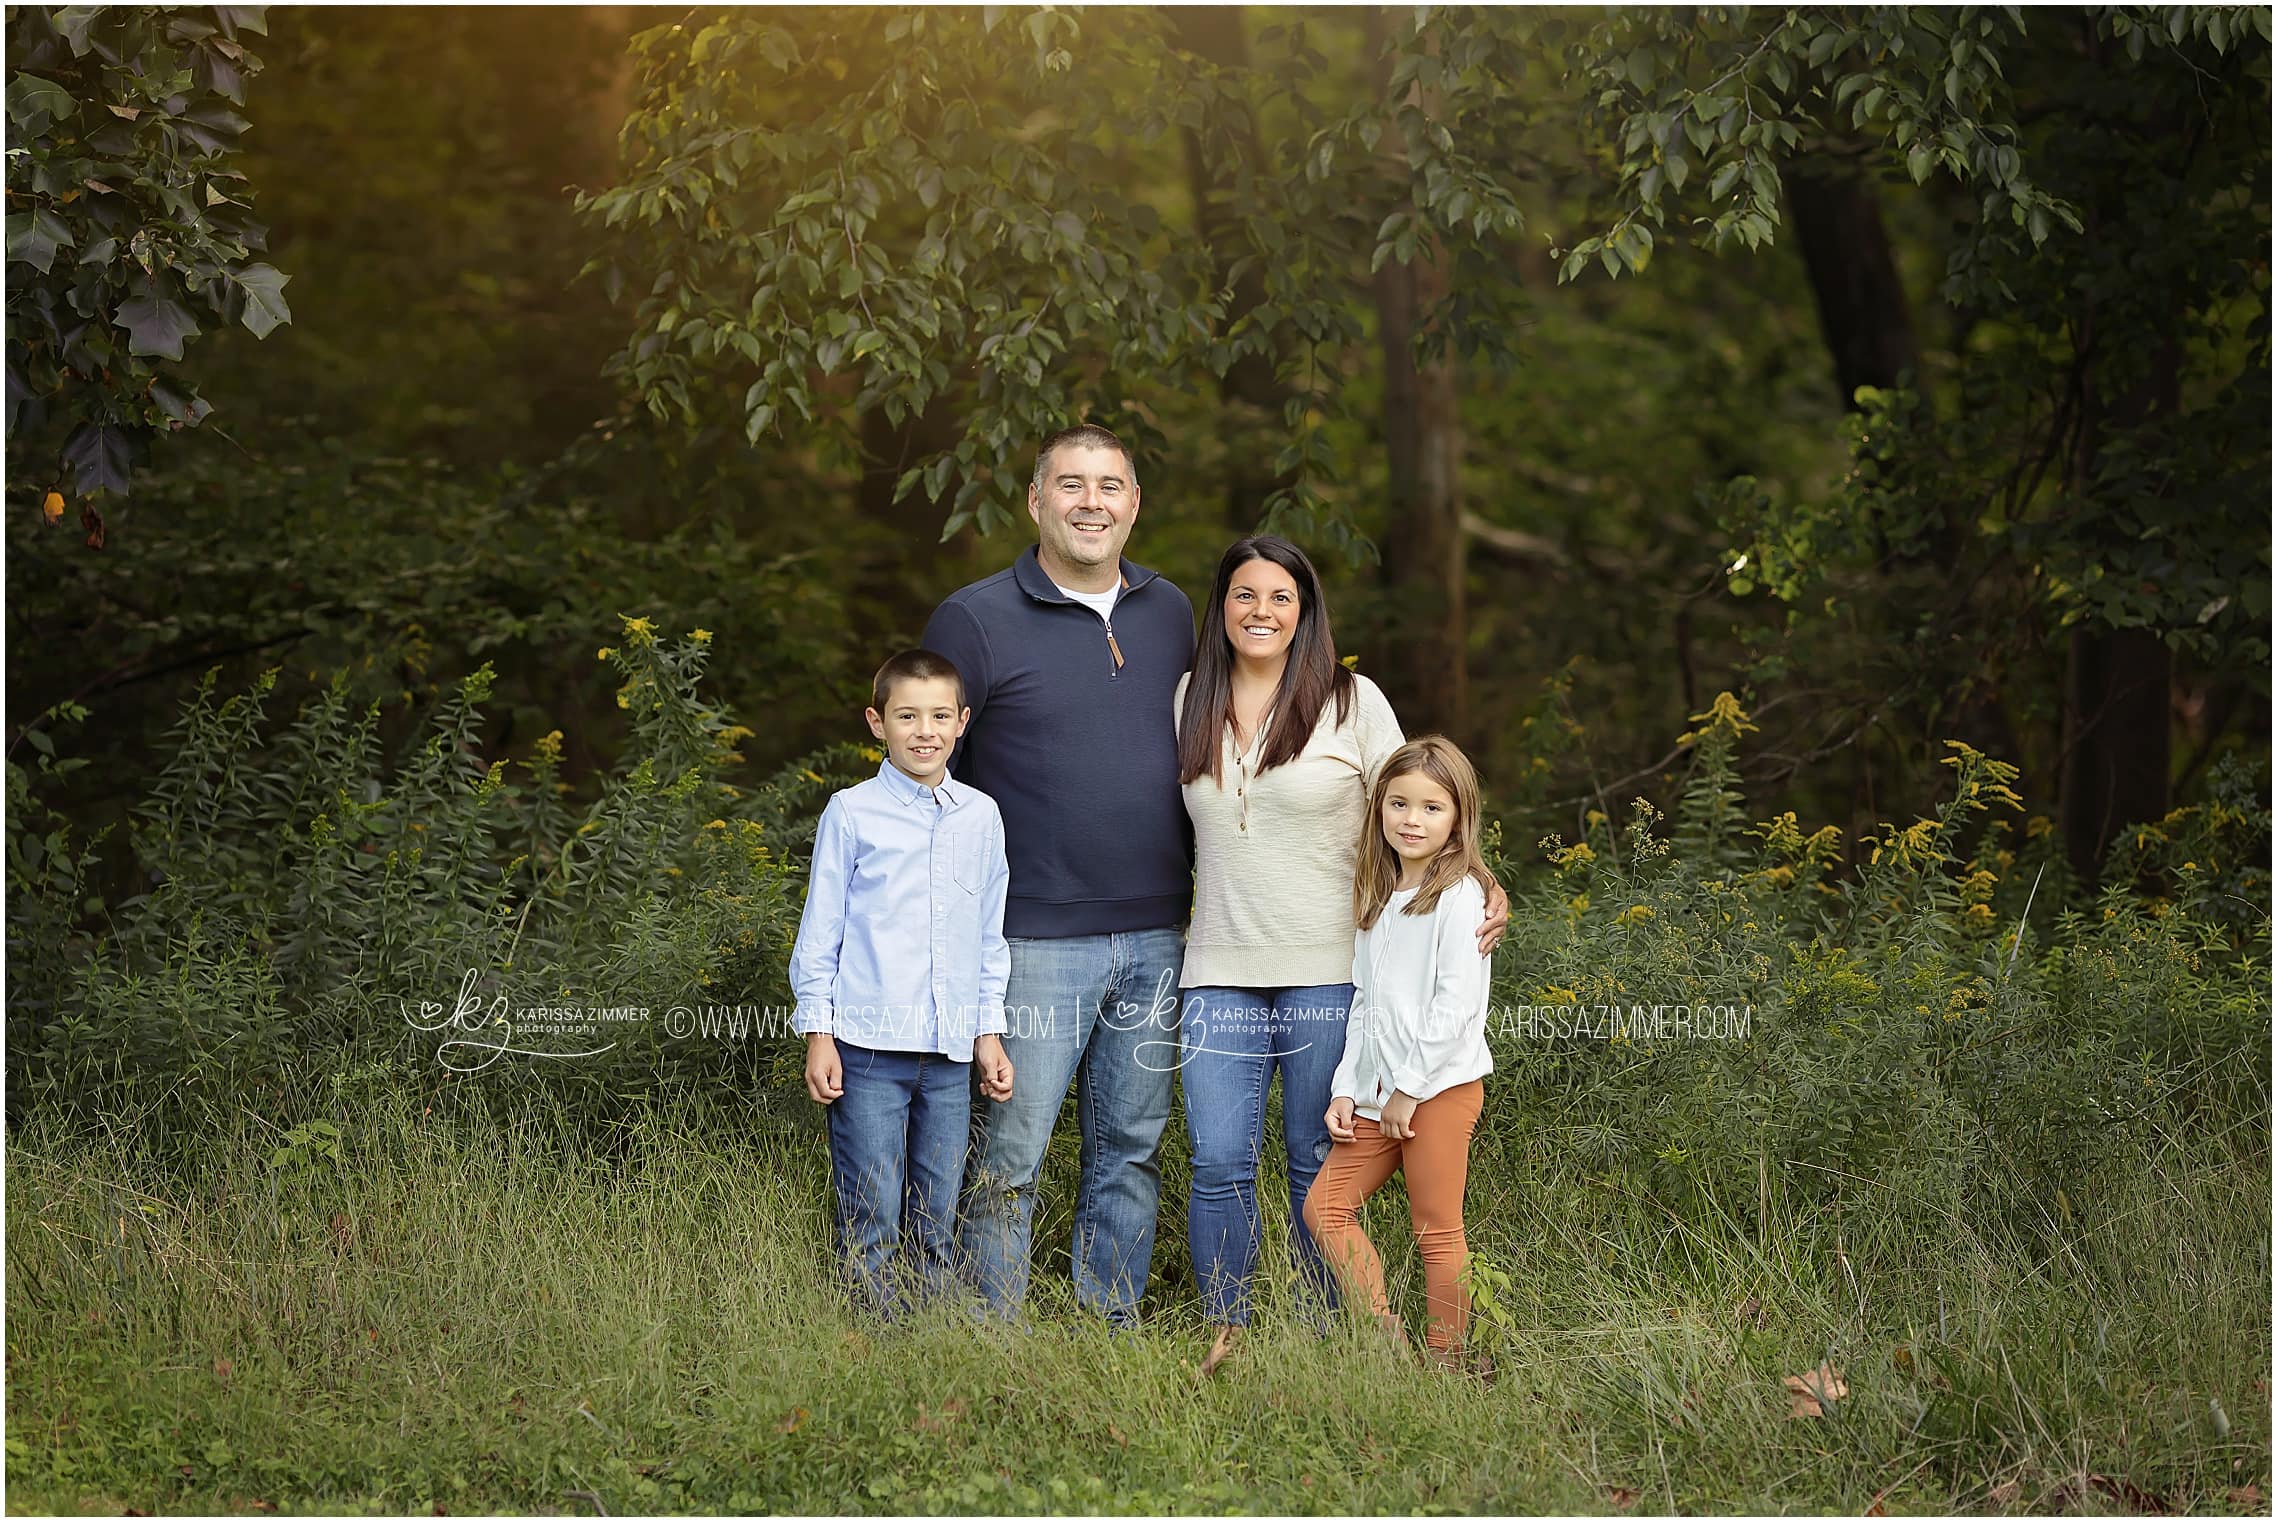 Outdoor Fall Family photographer captures images near Harrisburg PA